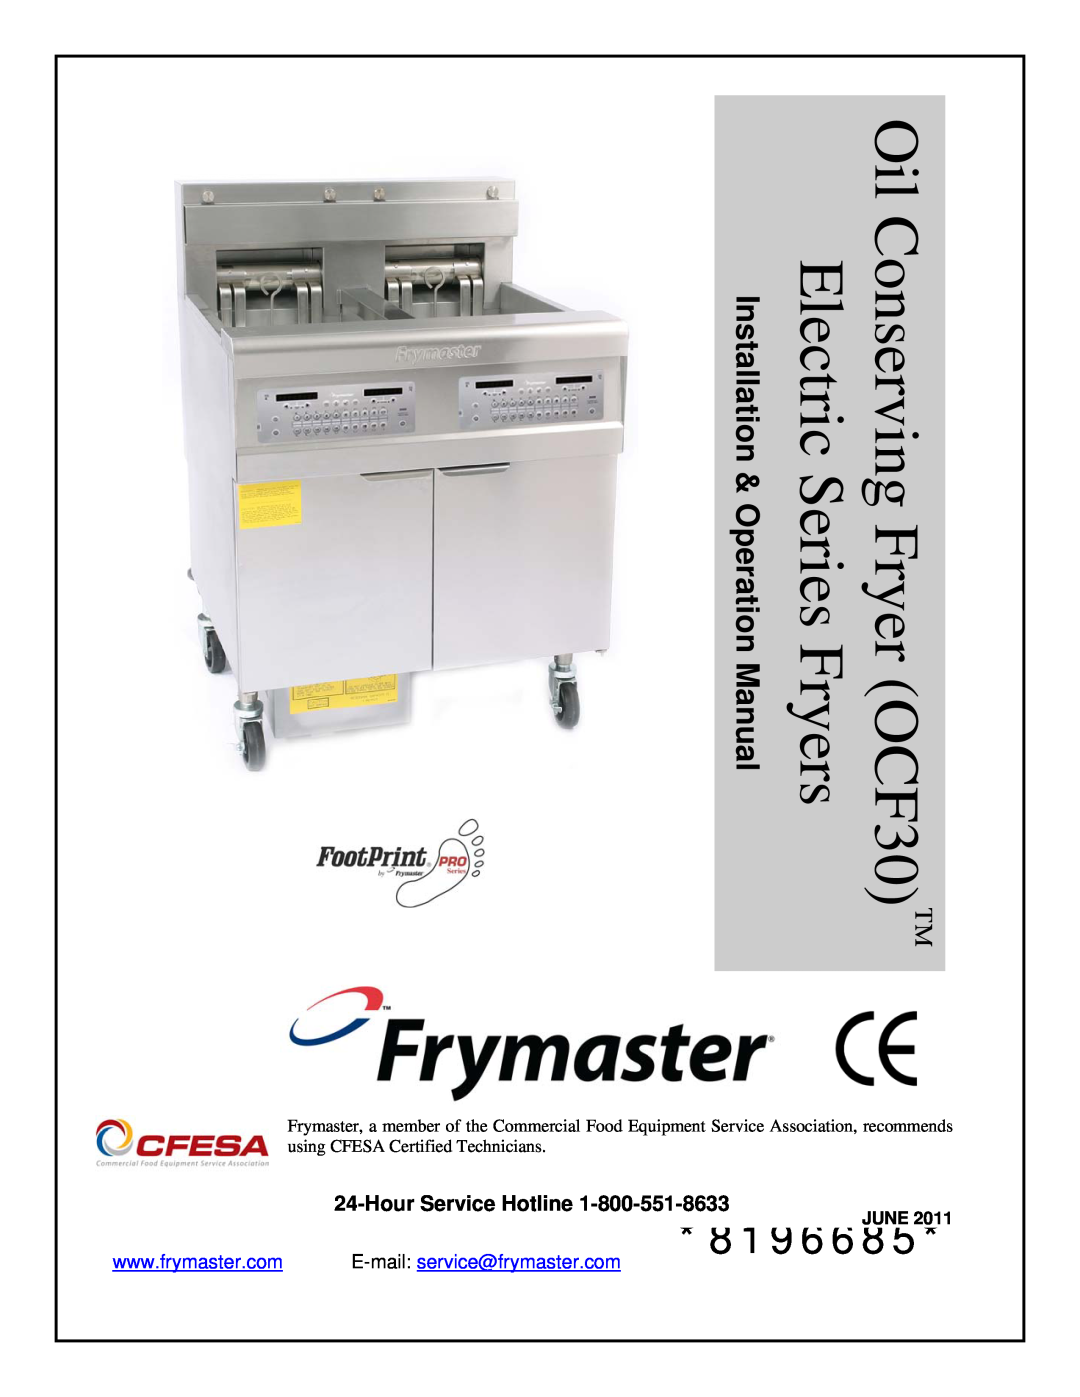 Frymaster operation manual Oil Conserving Fryer OCF30 Electric Series Fryers, 8196685, June 